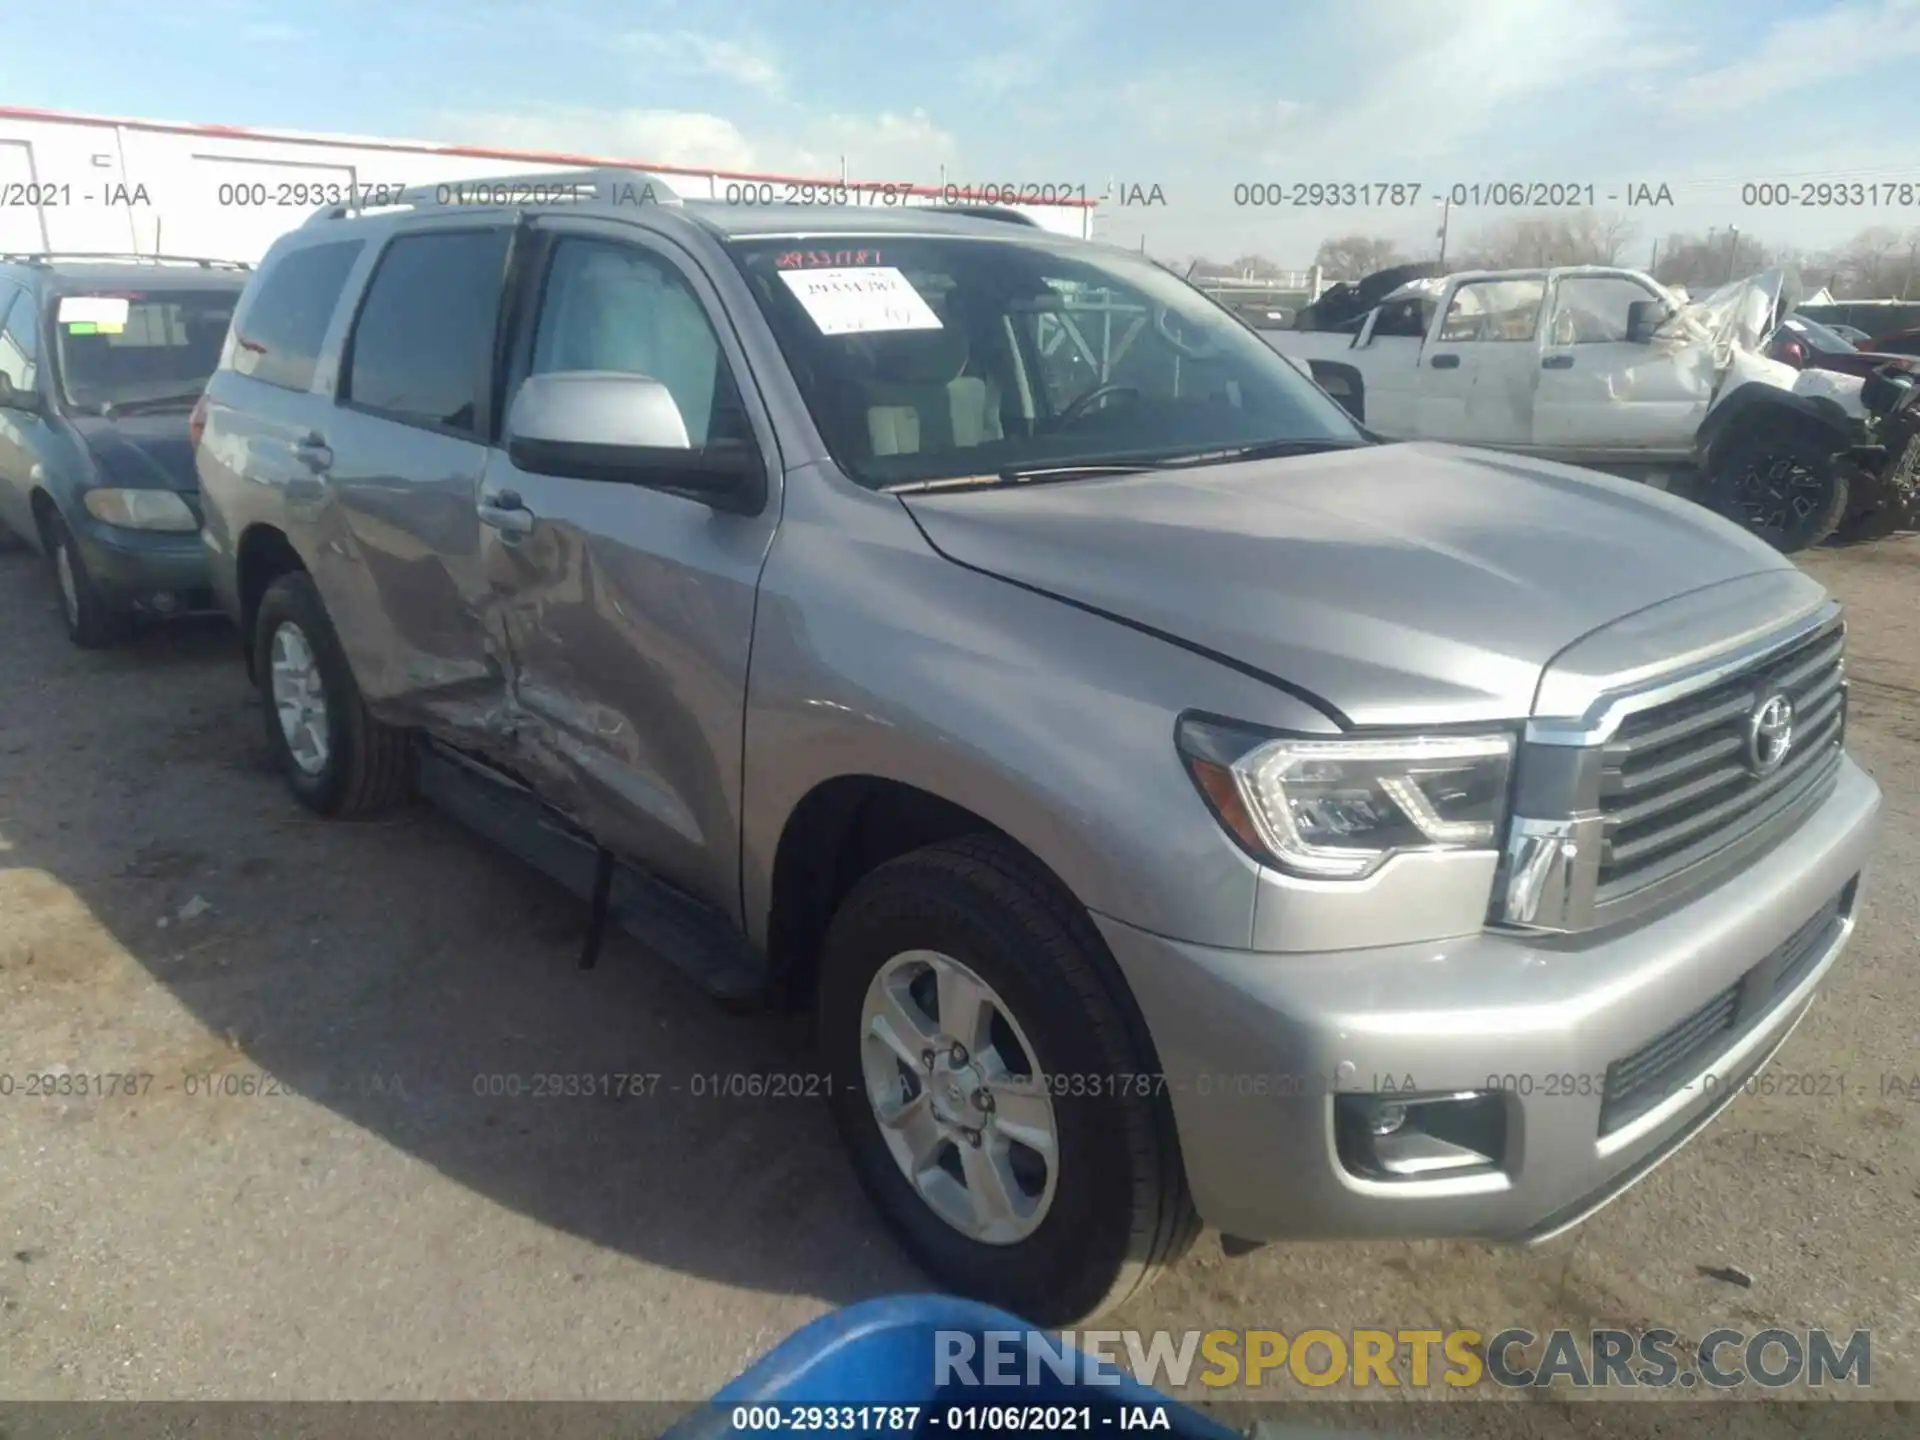 1 Photograph of a damaged car 5TDBY5G19KS166580 TOYOTA SEQUOIA 2019